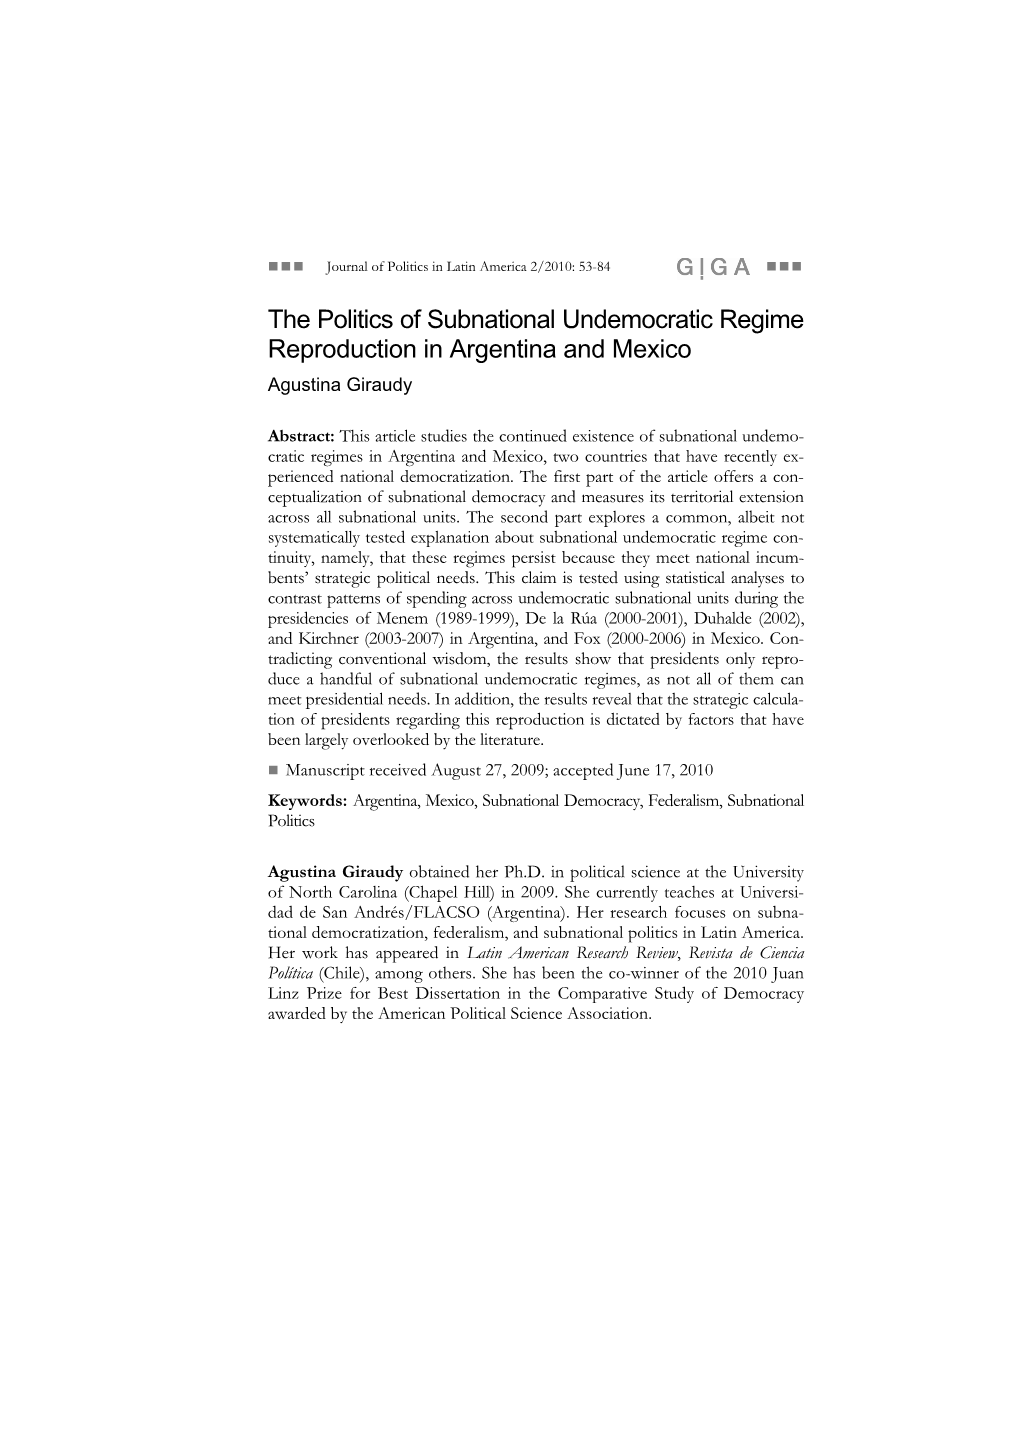 The Politics of Subnational Undemocratic Regime Reproduction in Argentina and Mexico Agustina Giraudy